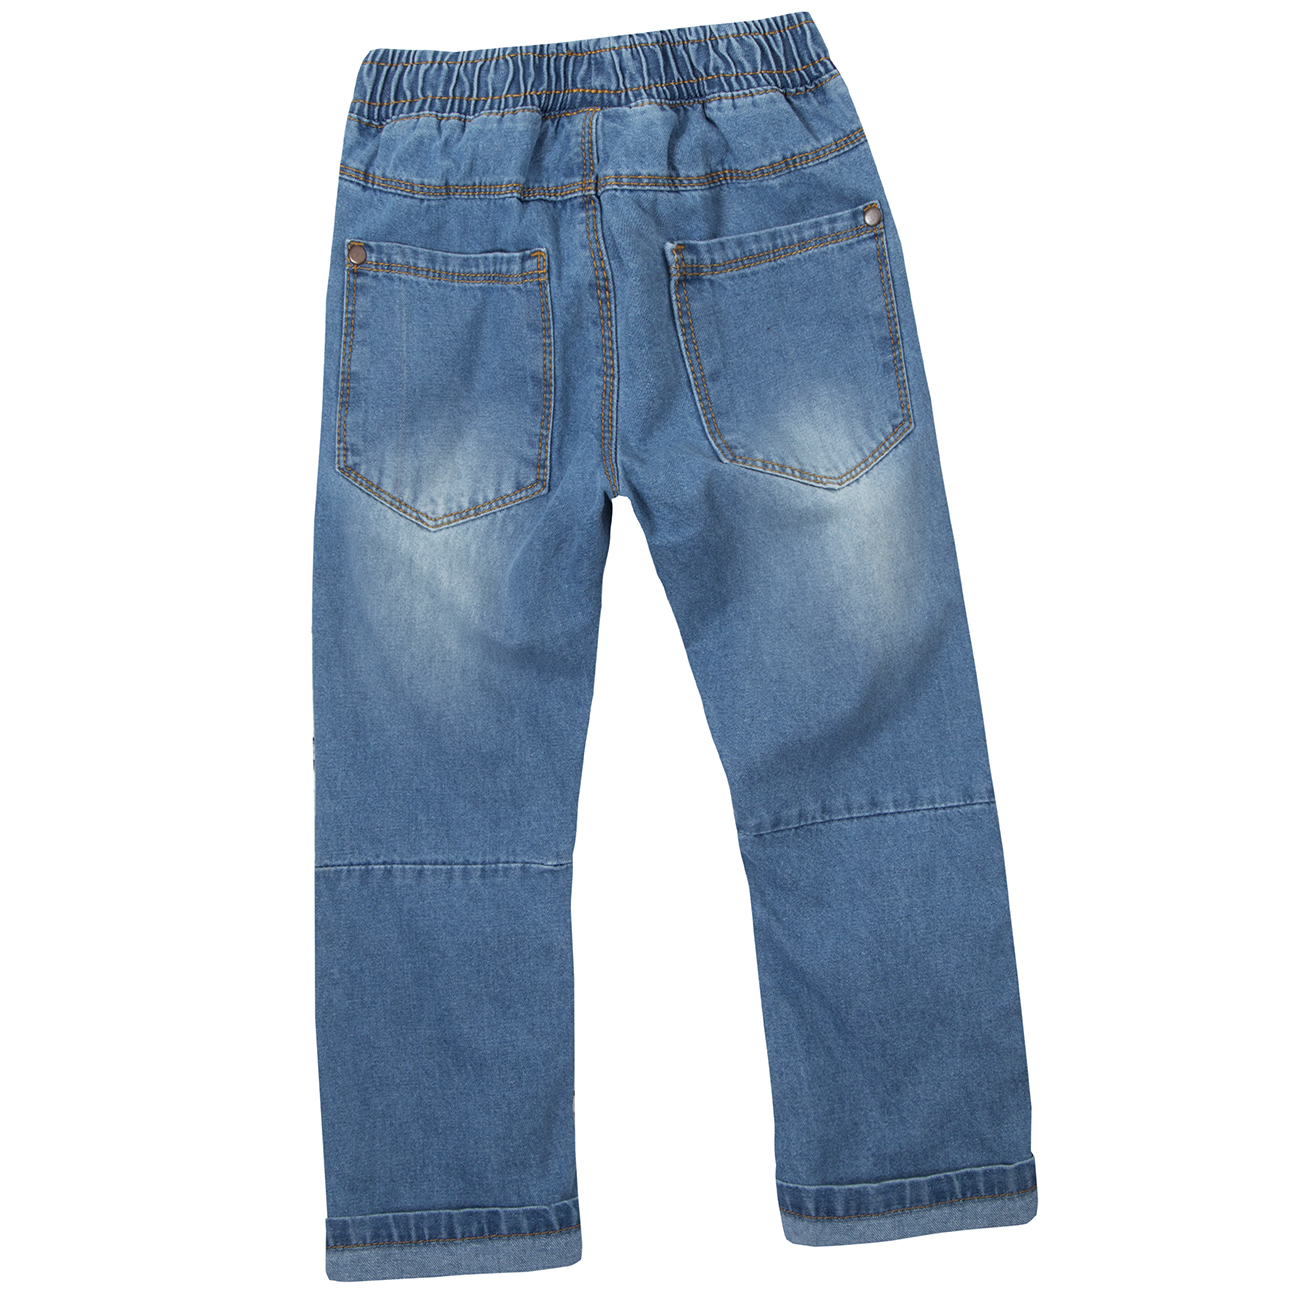 Minikidz Infant Boys 100/% Cotton Demin Jeans with Pockets and Elasticated Waistband